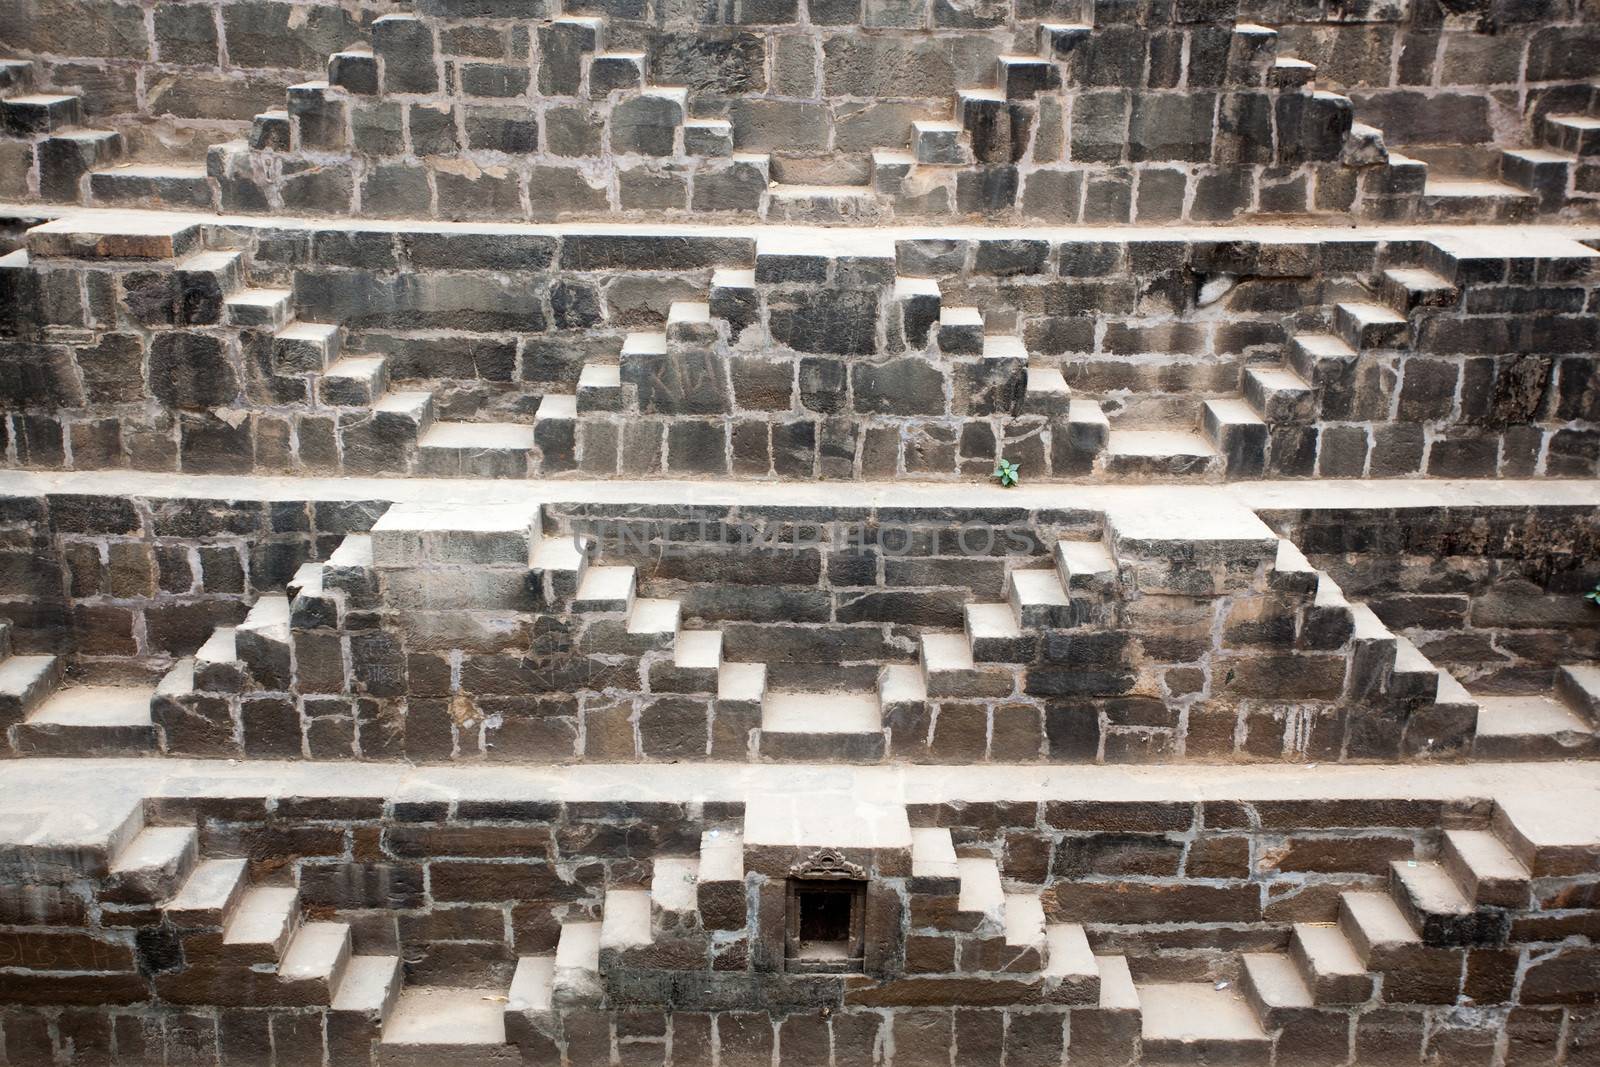 the giant step well of abhaneri in rajasthan state in india